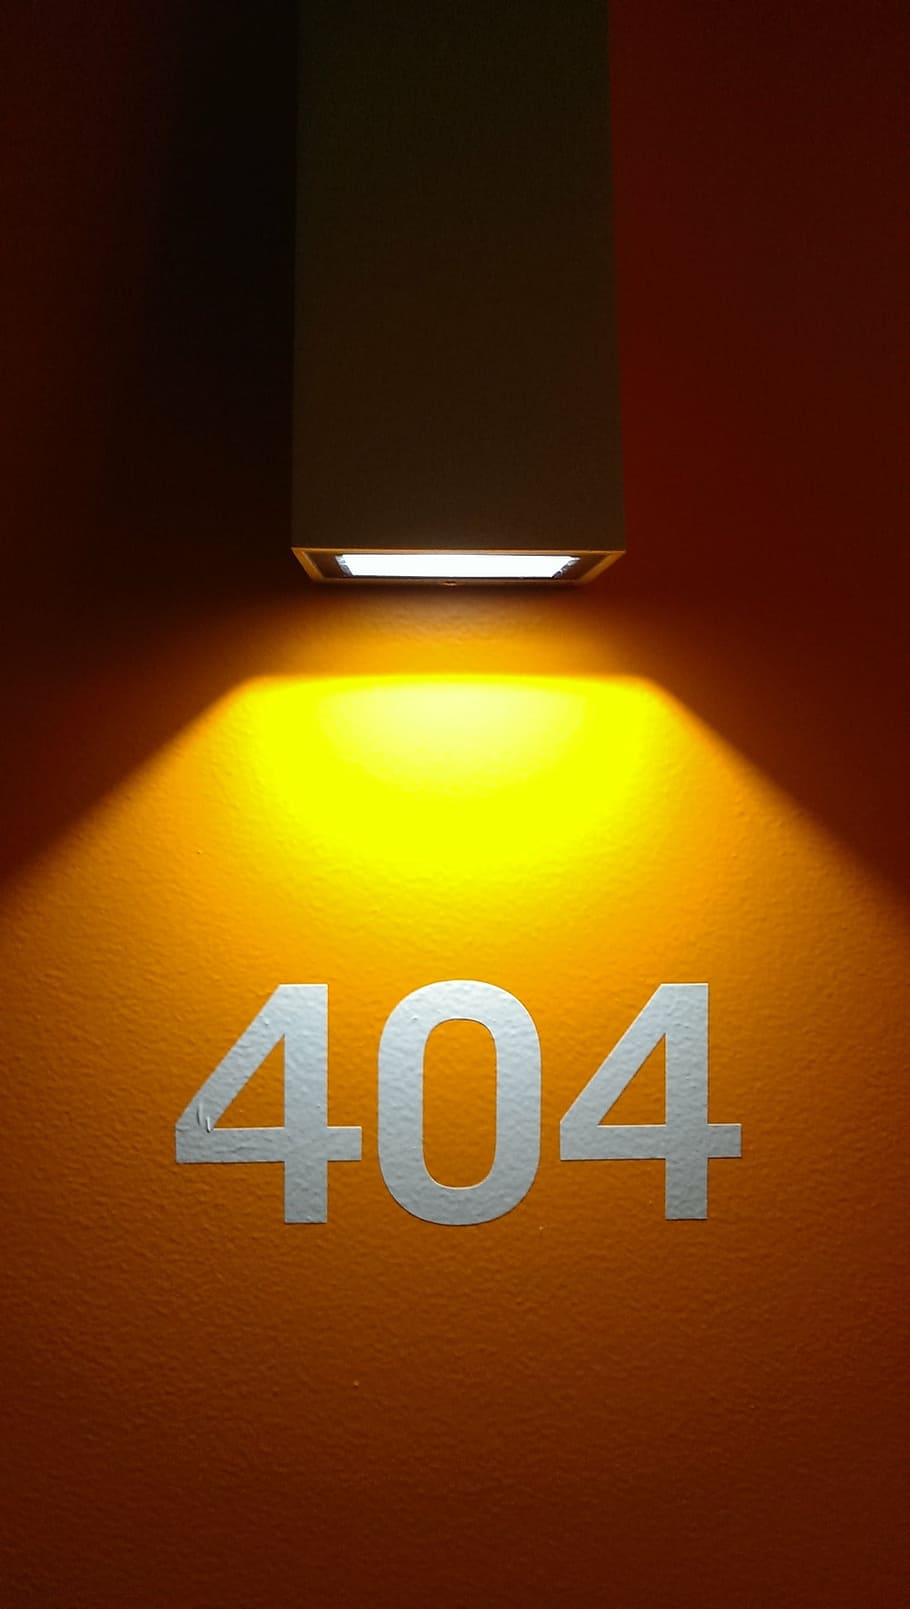 404 print on orange wall, page not found, light, shadow, hotel, HD wallpaper